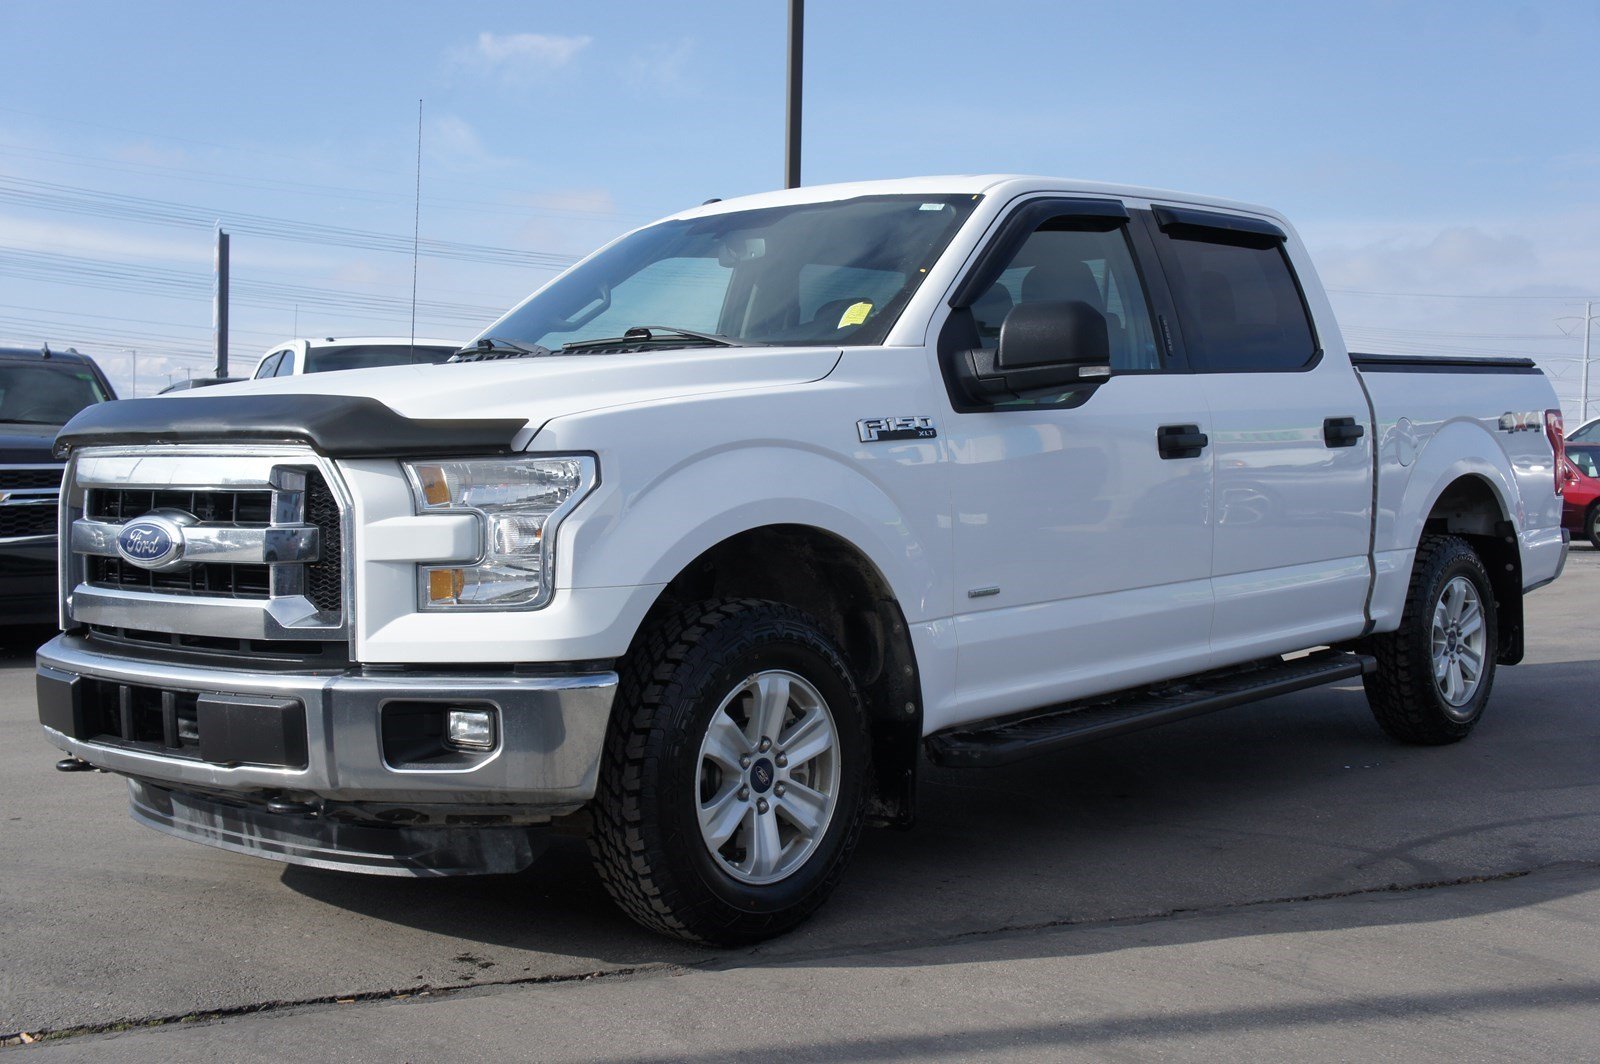 Pre-Owned 2013 Ford F-150 XLT Crew Cab Pickup in Sandy #B5084A 2013 Ford F-150 Xlt Supercrew 4wd Towing Capacity